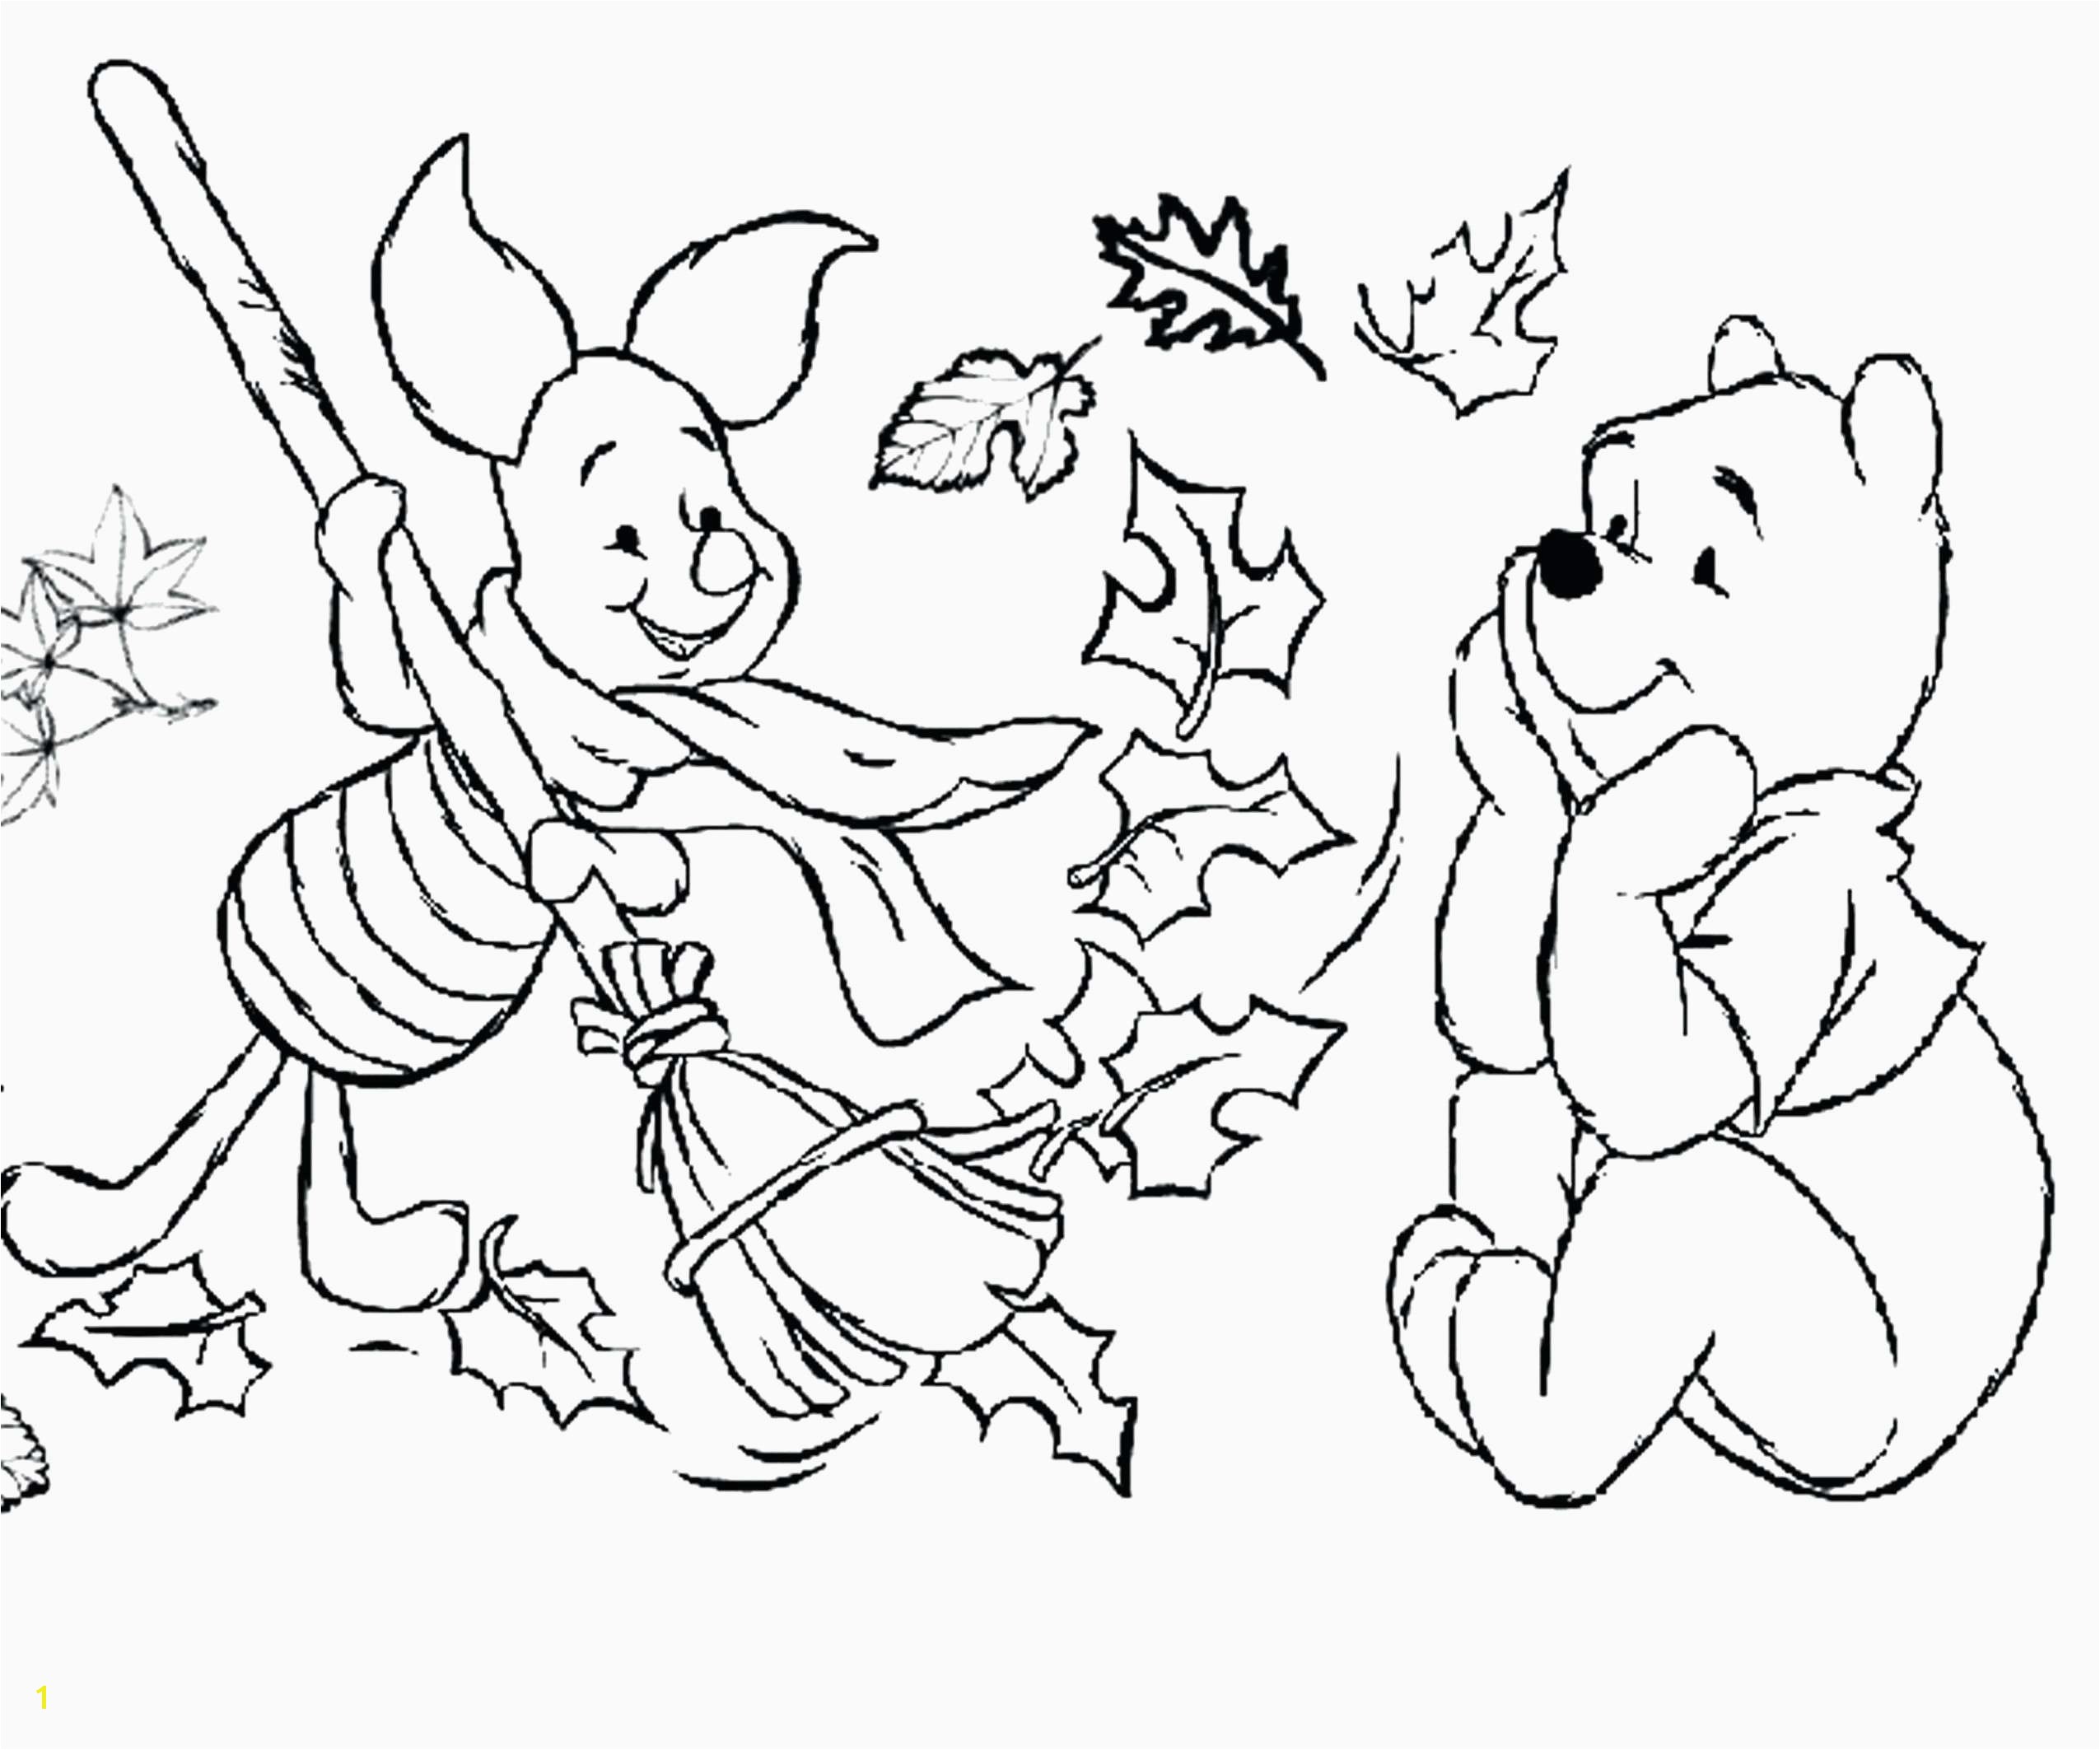 Www Coloring Pages 30 Kids Coloring Pages for Girls Free